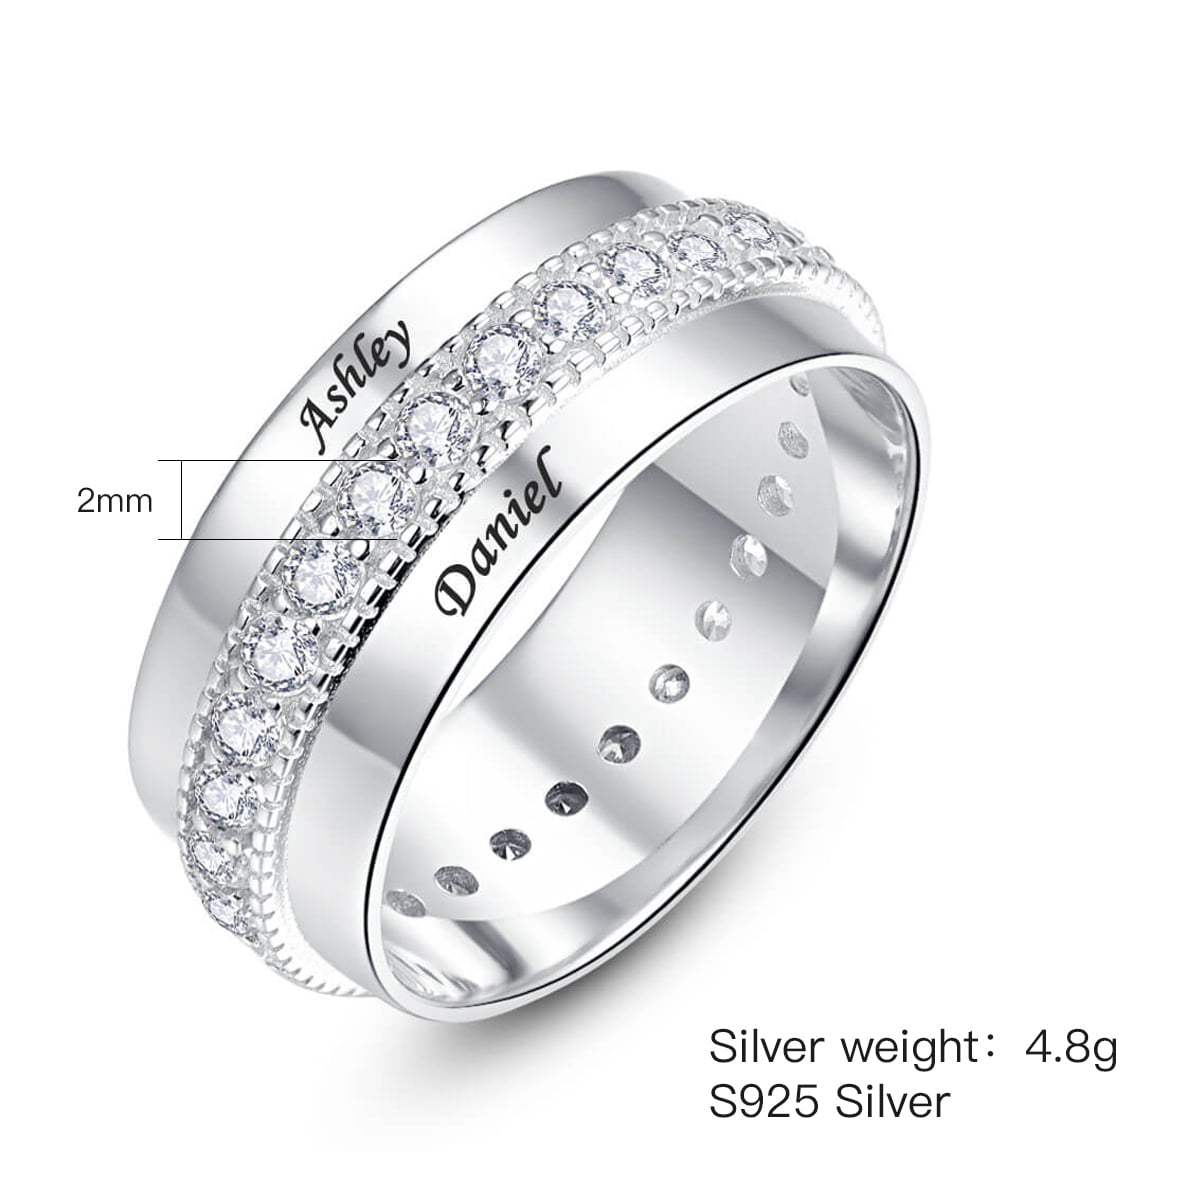 SILVERSHINE, silver plated adjustable royal and classy look king and queen  crown design couple ring for men and women.